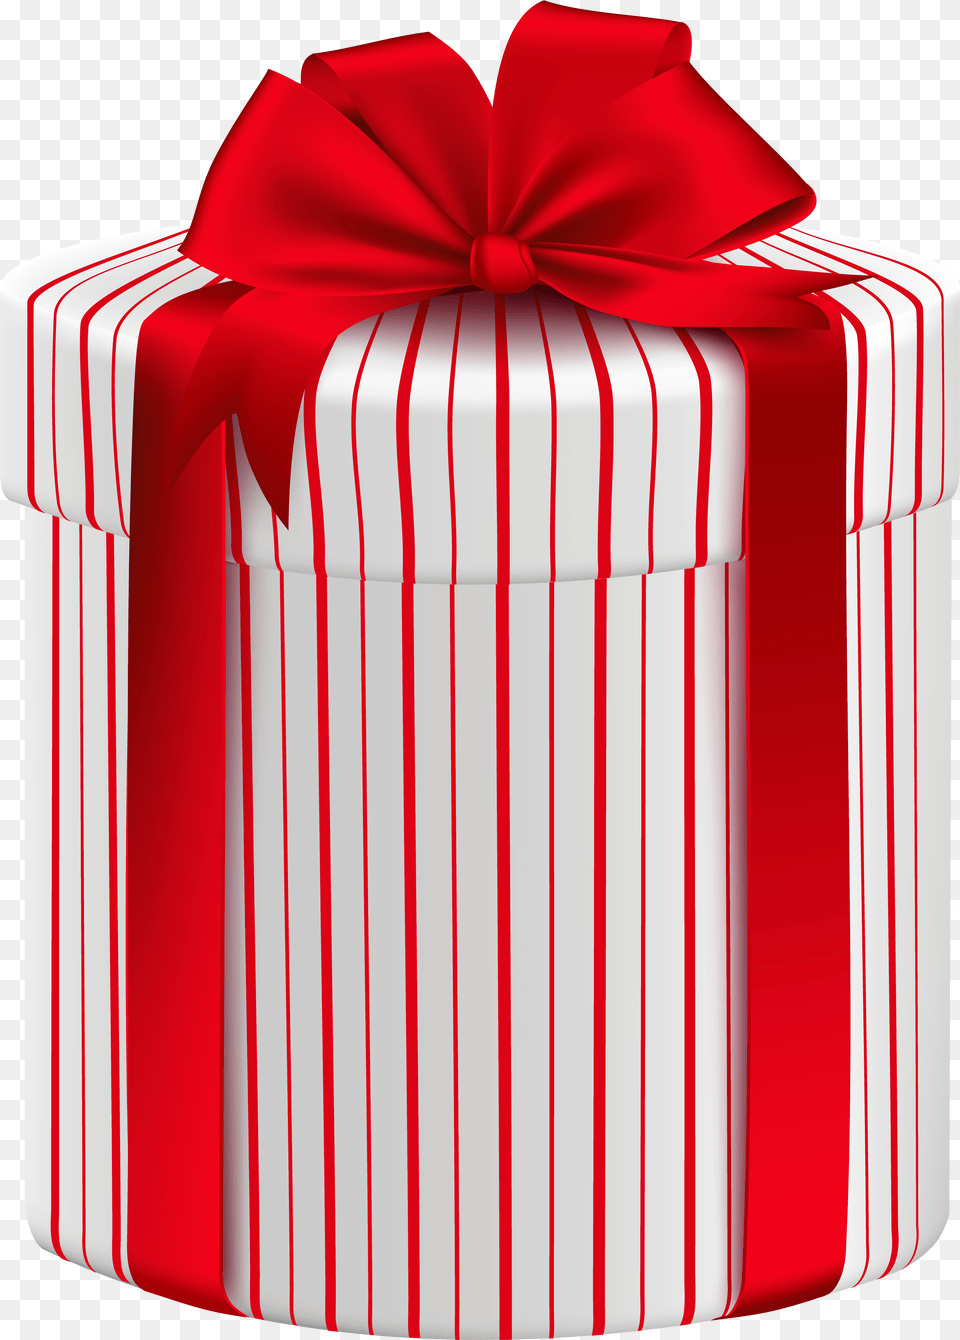 Gift Box With Red Bow Clipart Red Transparent Background Gift Box Christmas Png Image